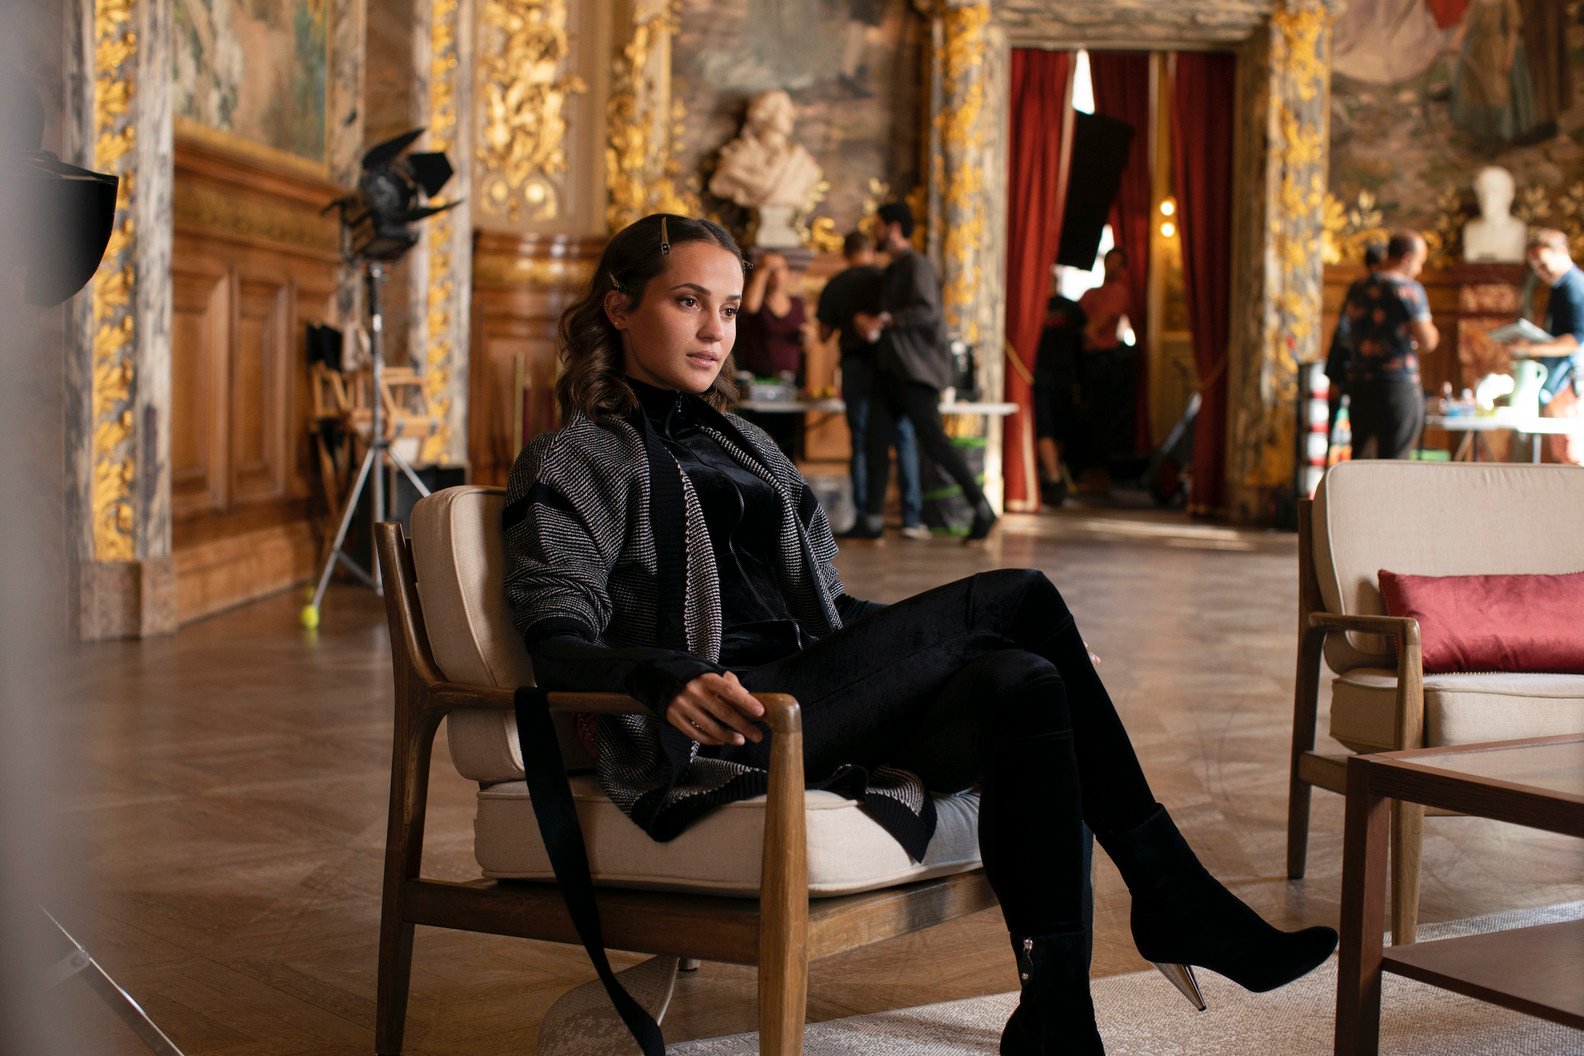 Alicia Vikander wears navy shirt and black jeans while filming HBO series Irma  Vep in Paris